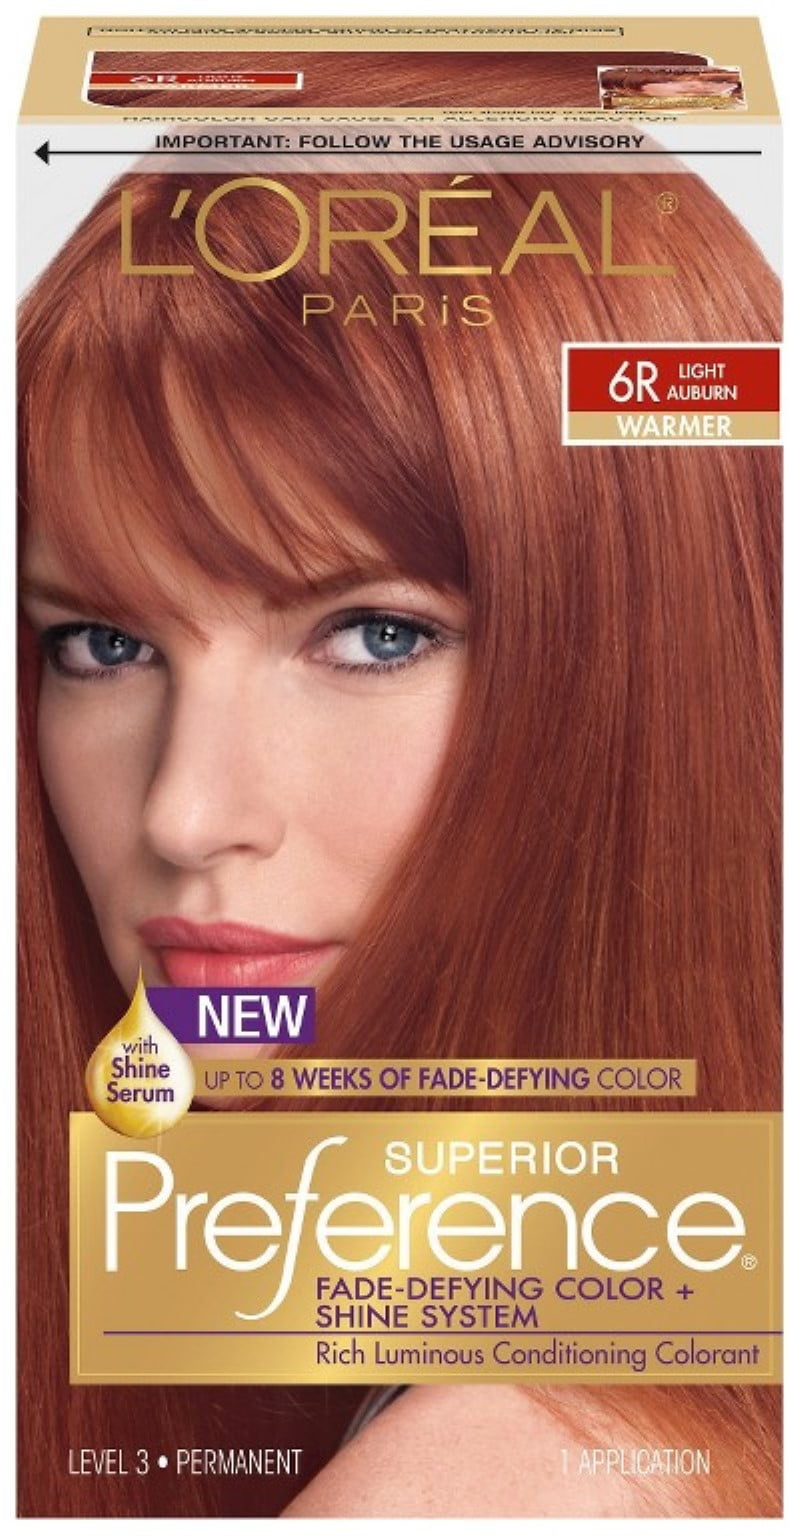 L'Oreal Superior Preference Permanent Hair Color, 6R Light Auburn